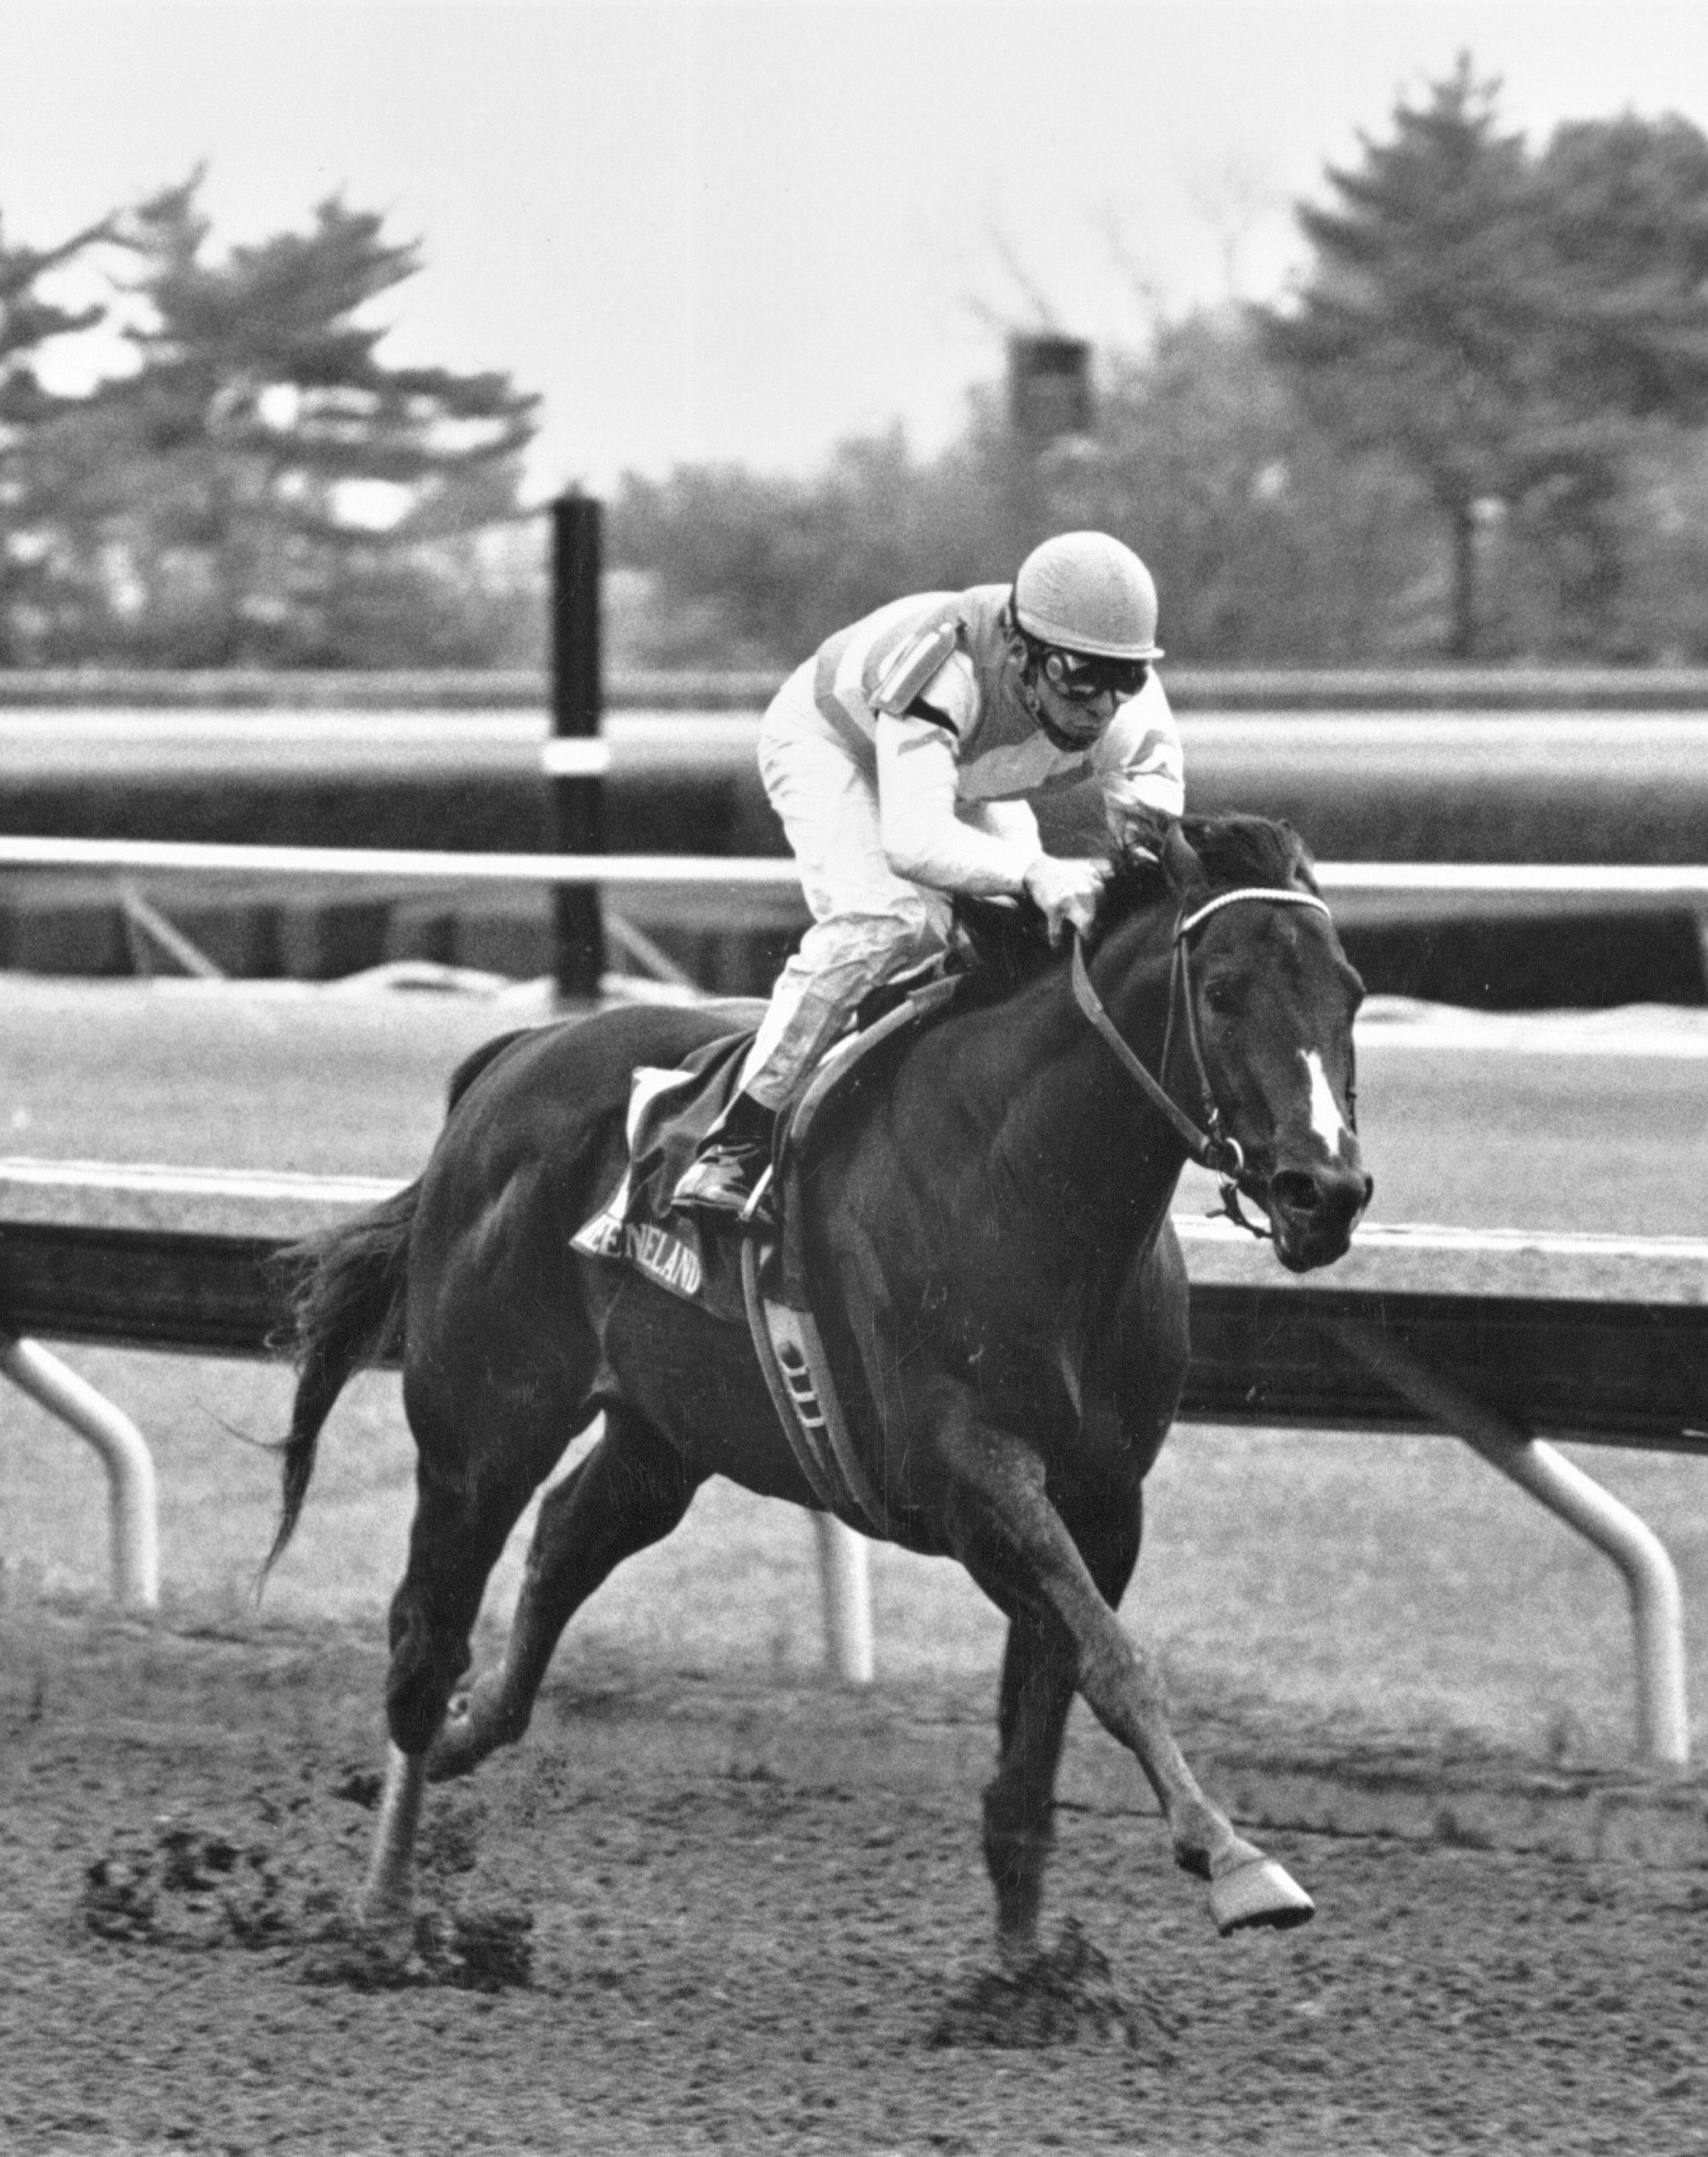 Housebuster (Craig Perret up) racing to victory in the 1990 Lafayette Stakes at Keeneland (Keeneland Association Bill Straus)